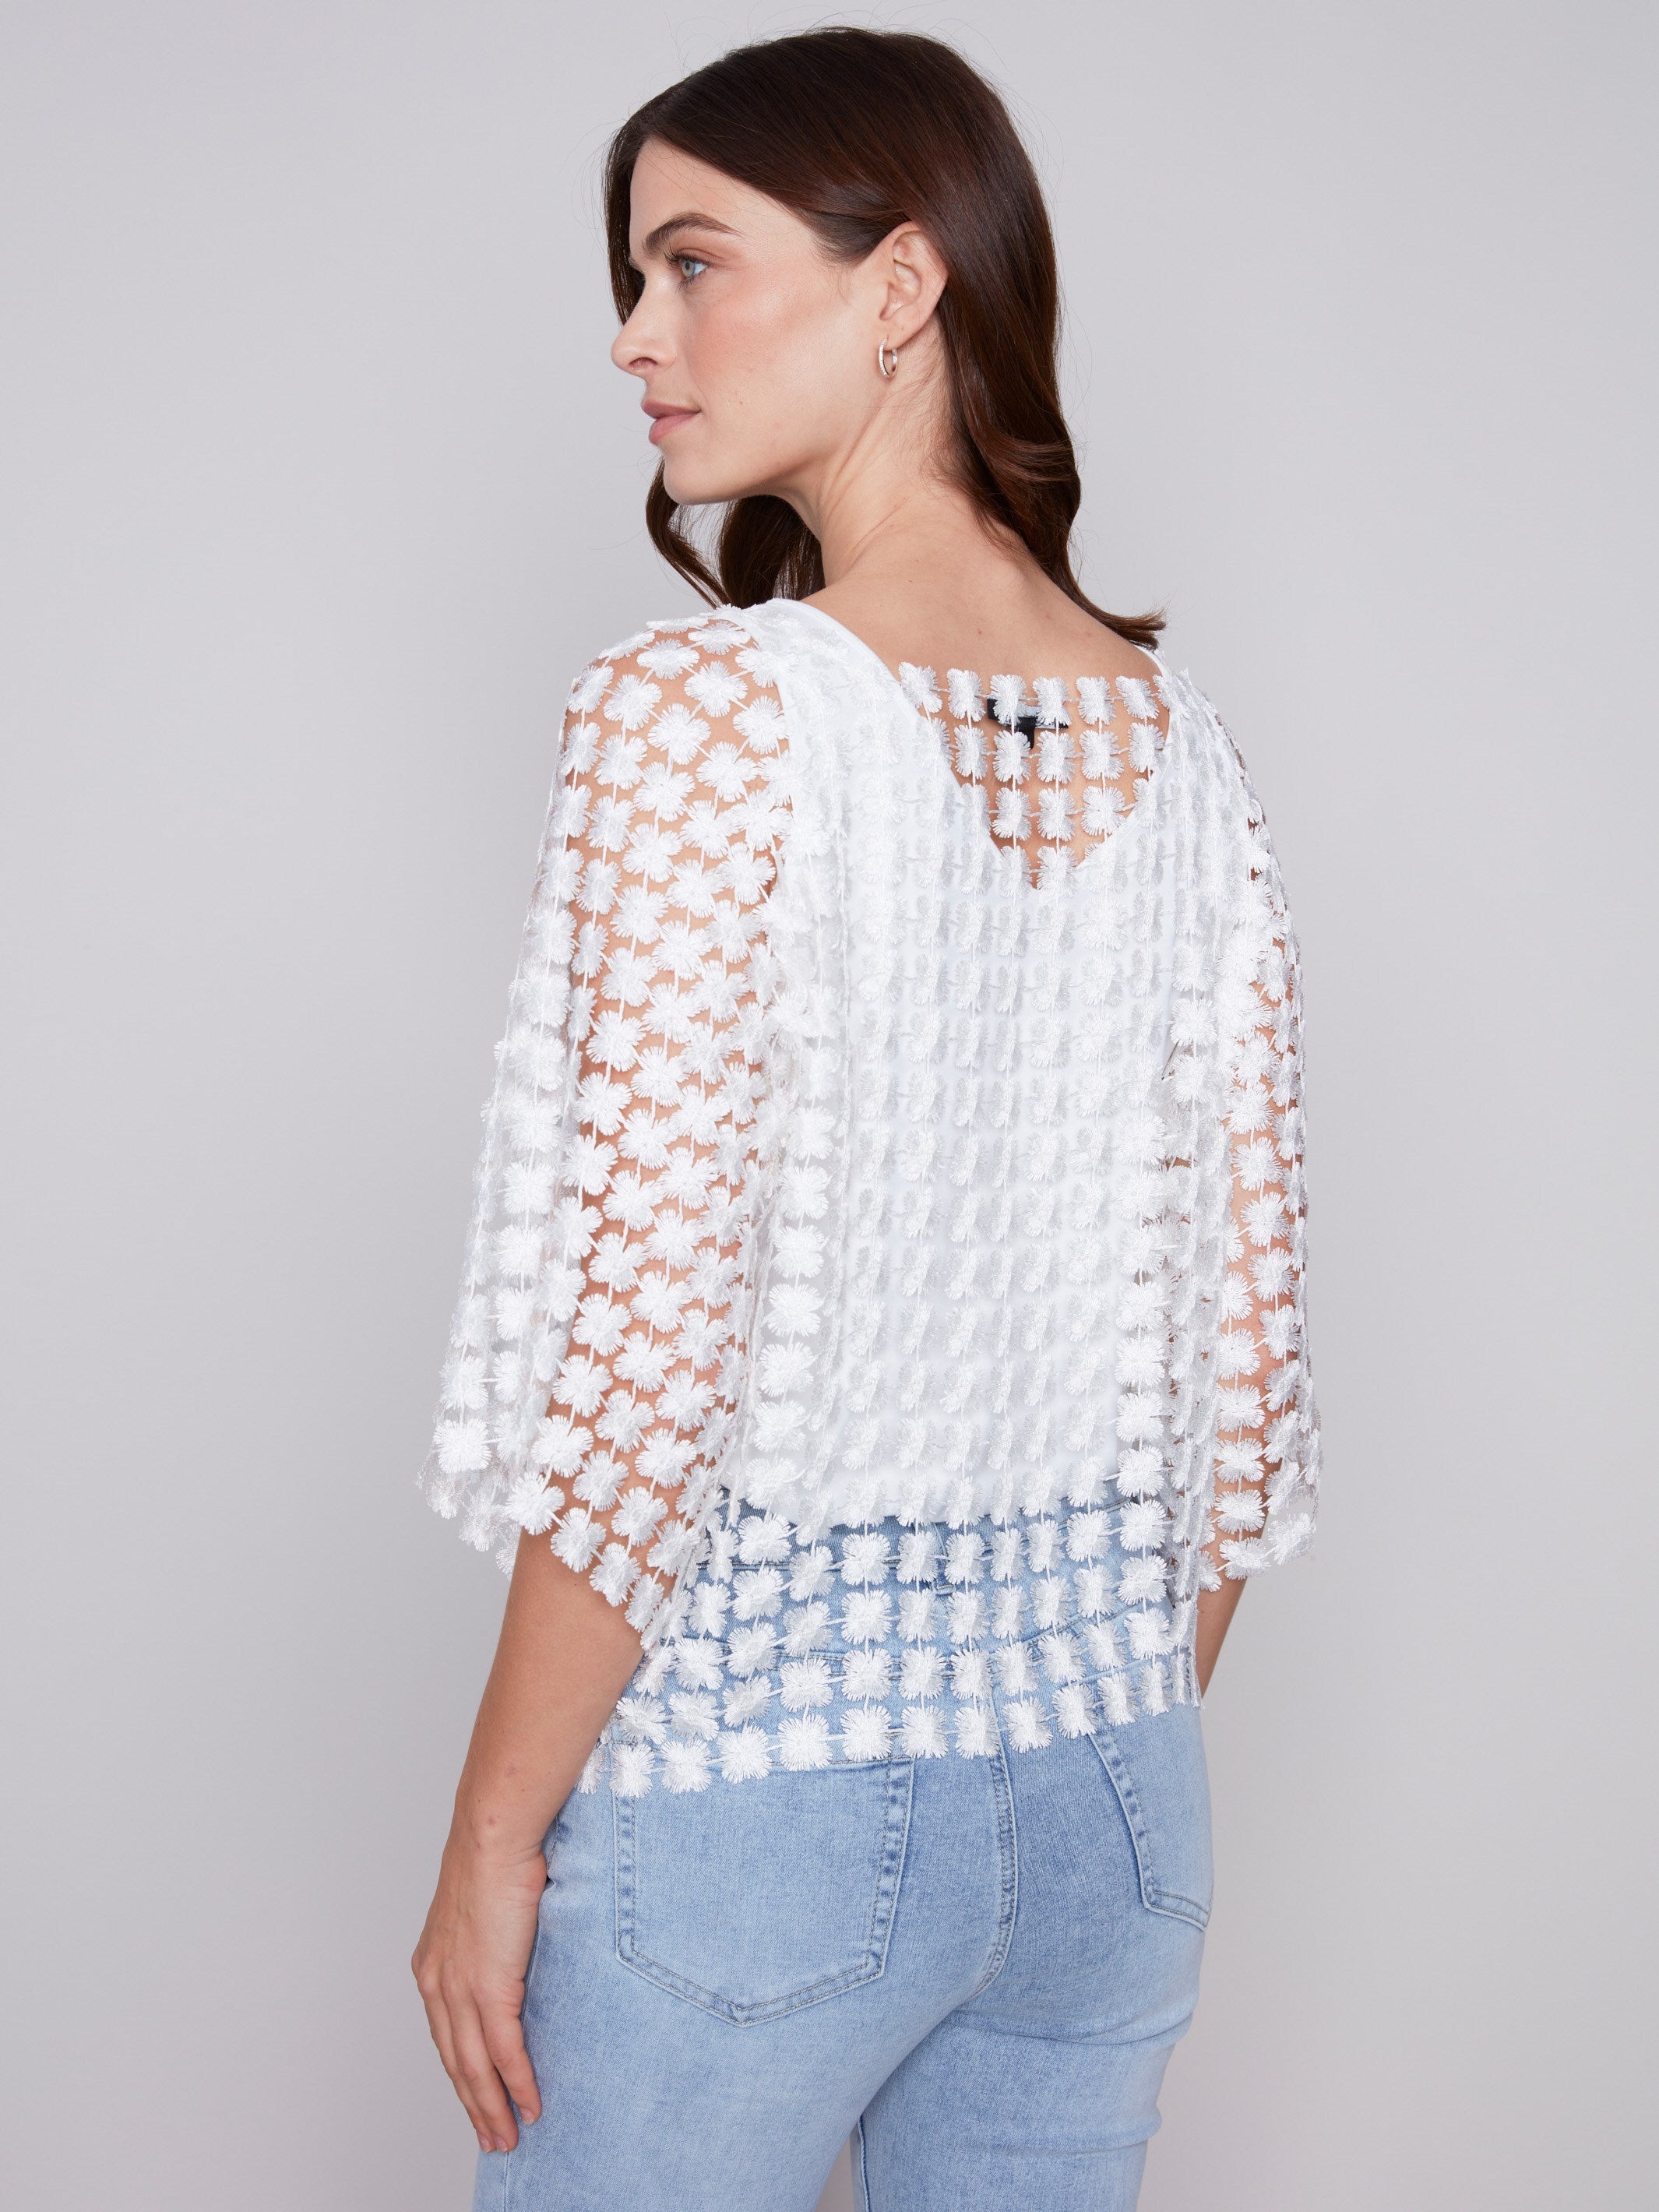 Textured Crochet Flower Top - White - Charlie B Collection Canada - Image 2